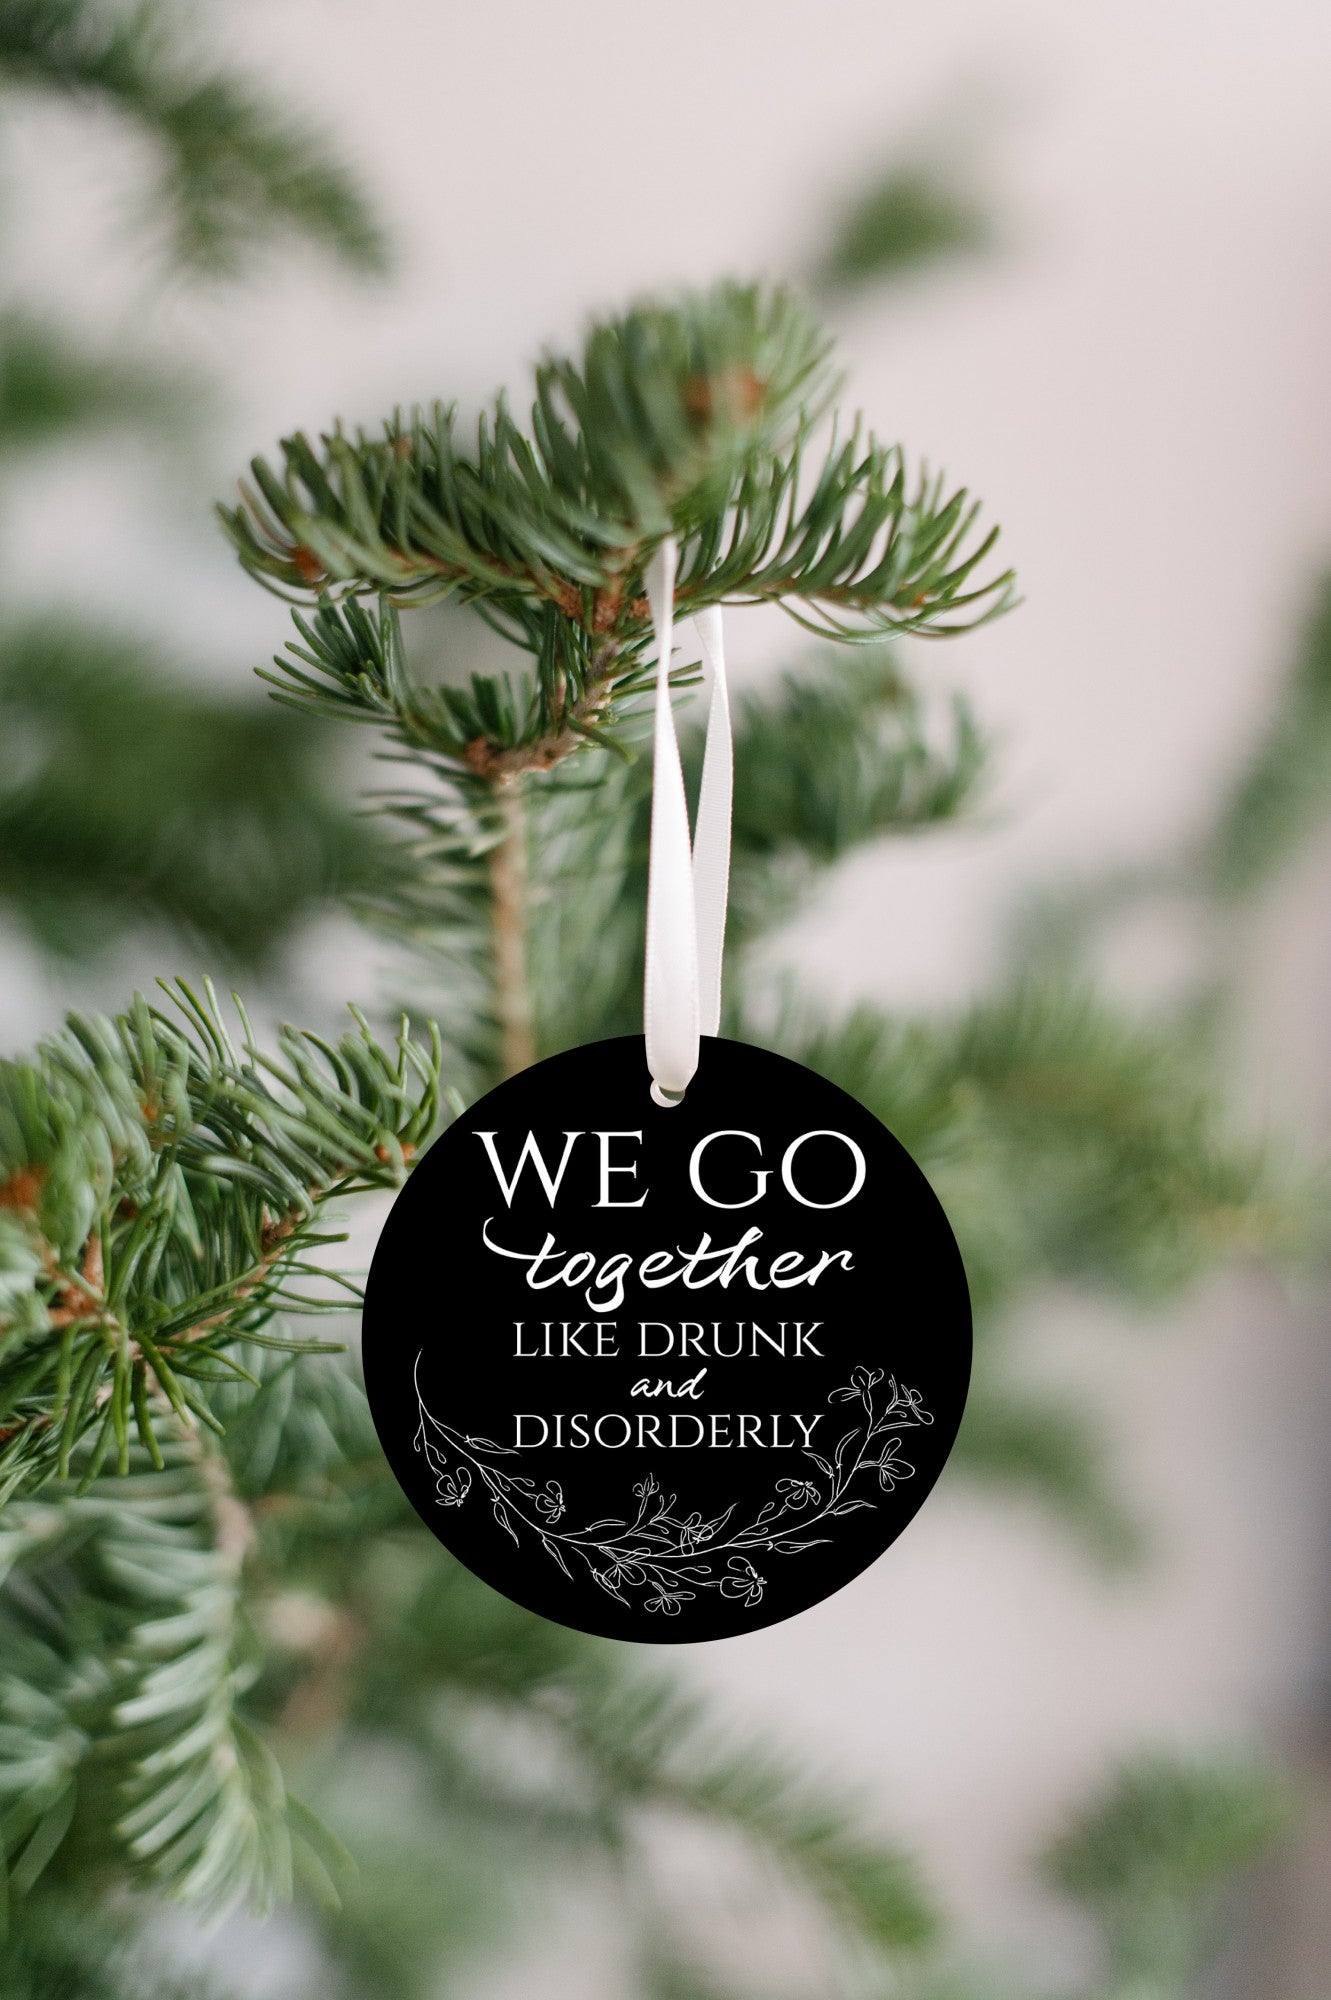 We Go Together Like Drunk & Disorderly Ornament